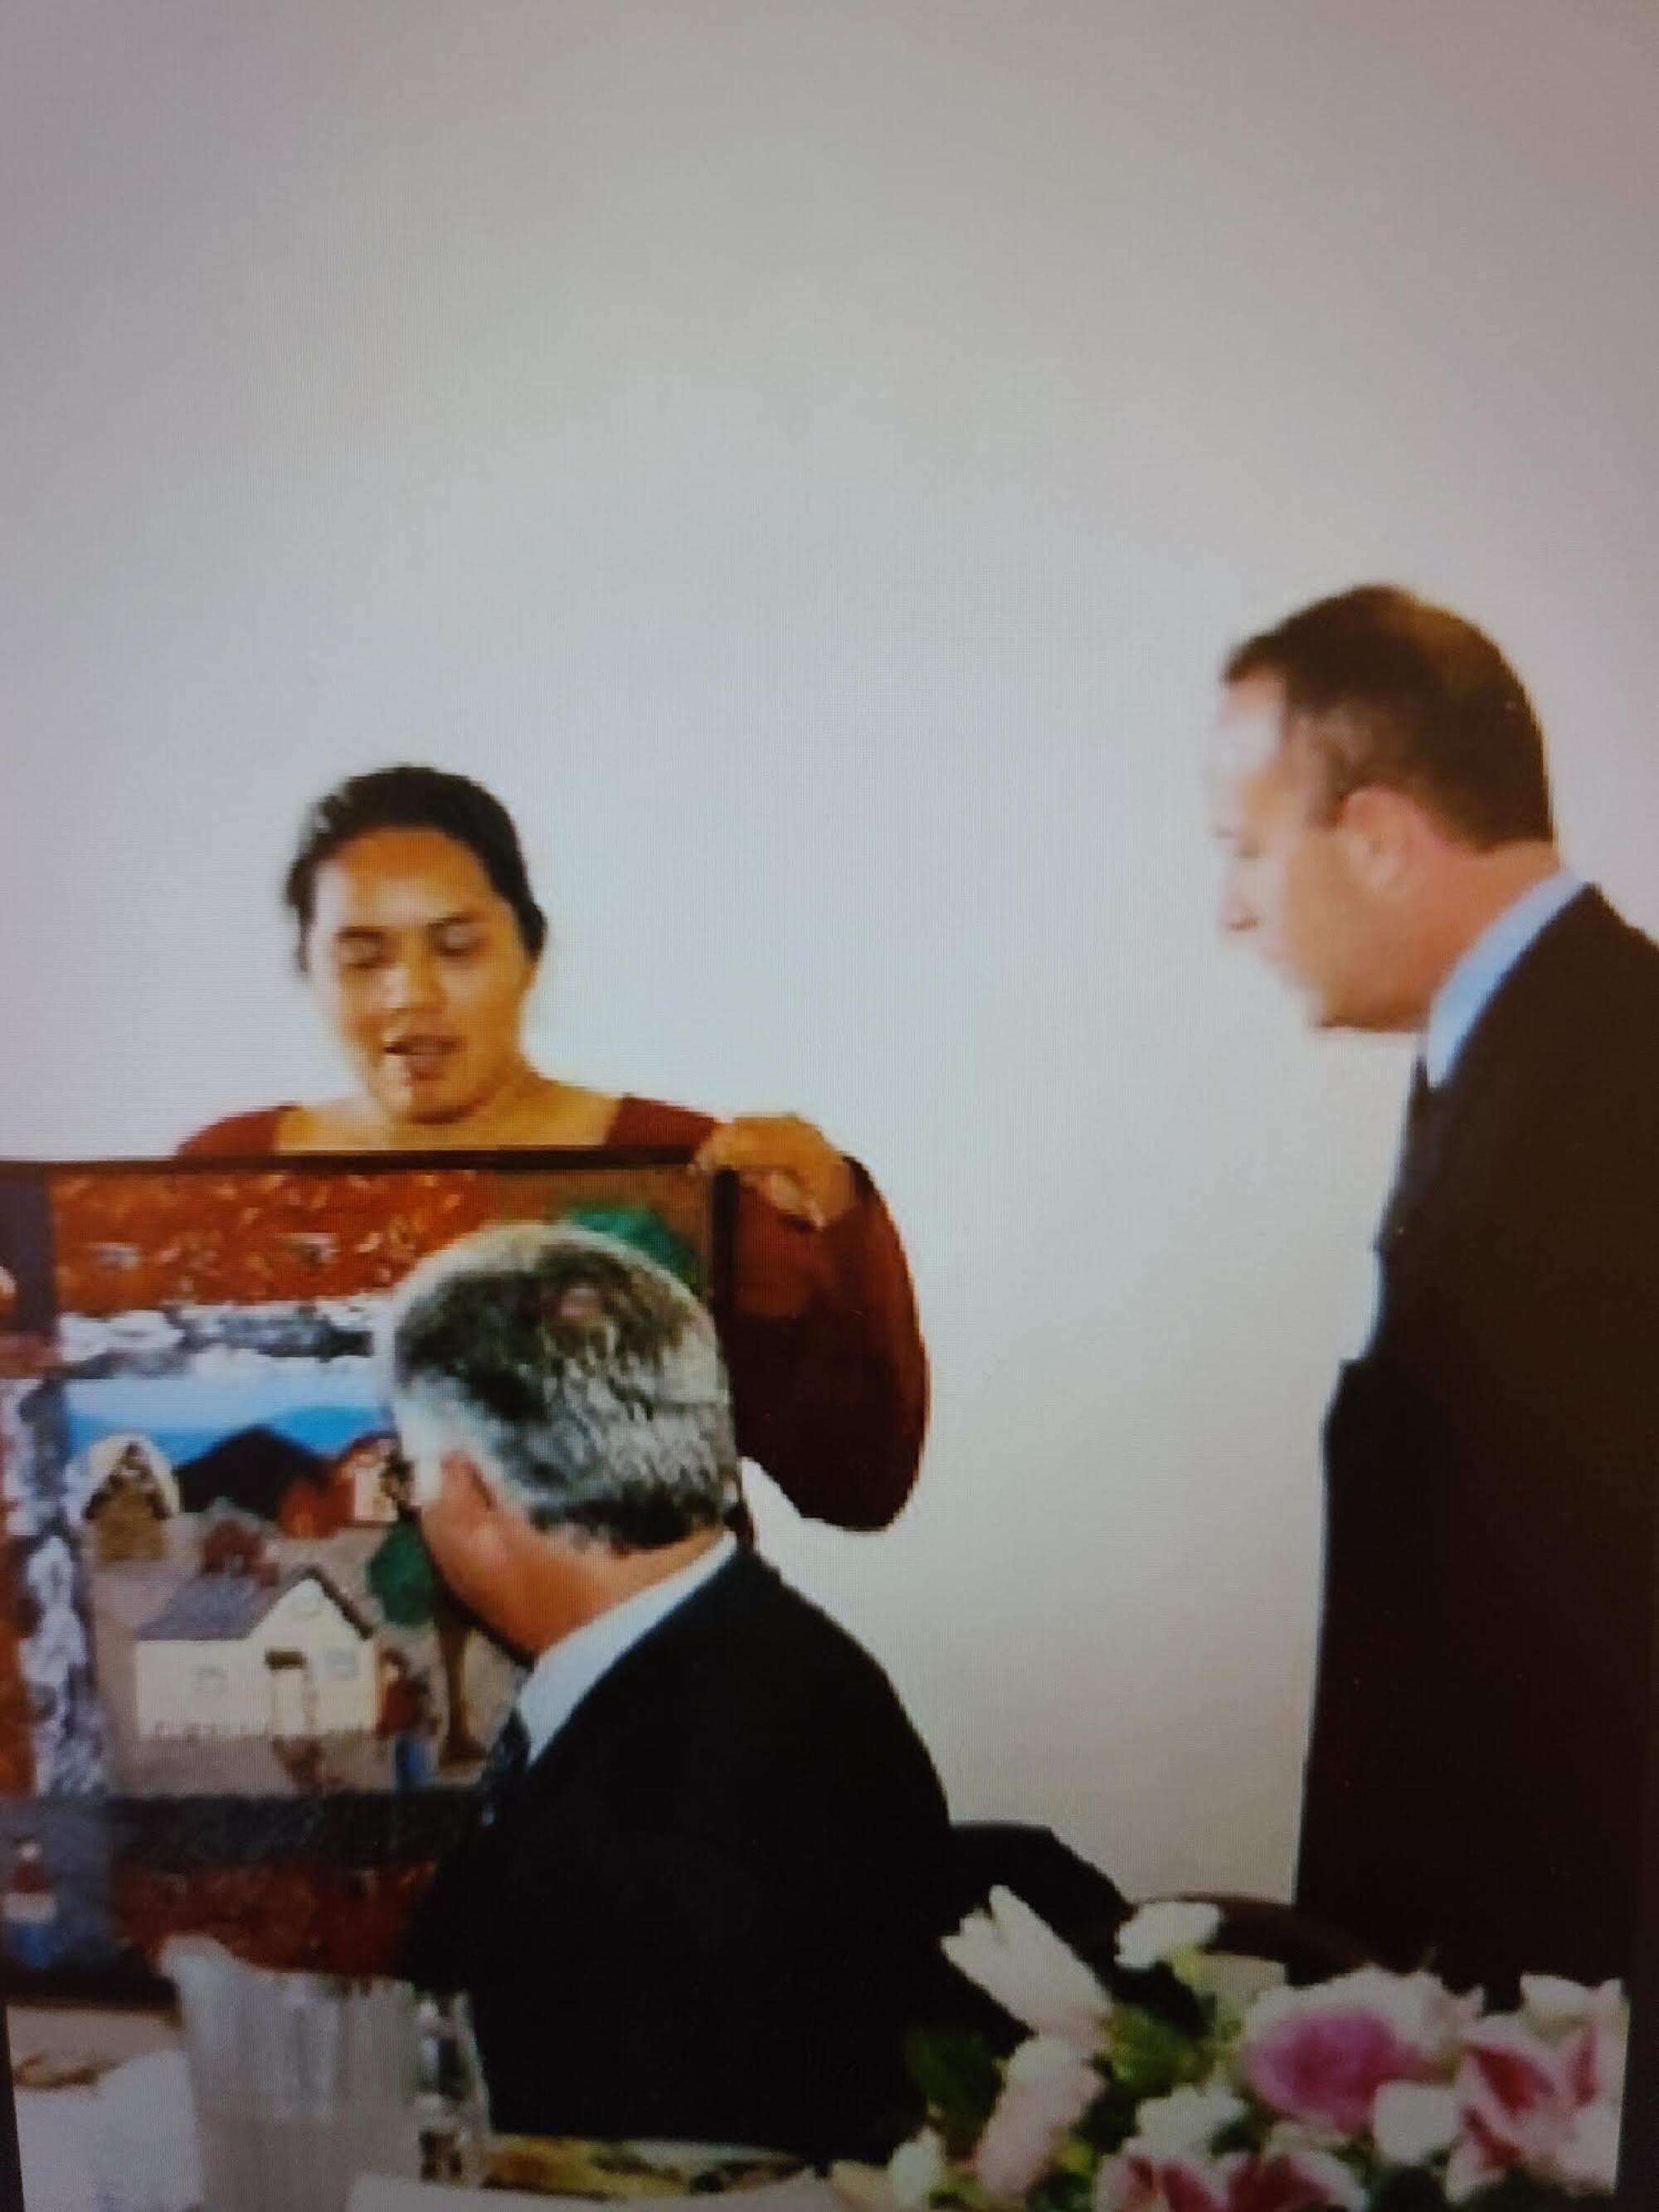 Sumi Juan, Charlene's mother, presents a quilt square she made to state lawmaker Darrell Steinberg, now Sacramento's mayor.